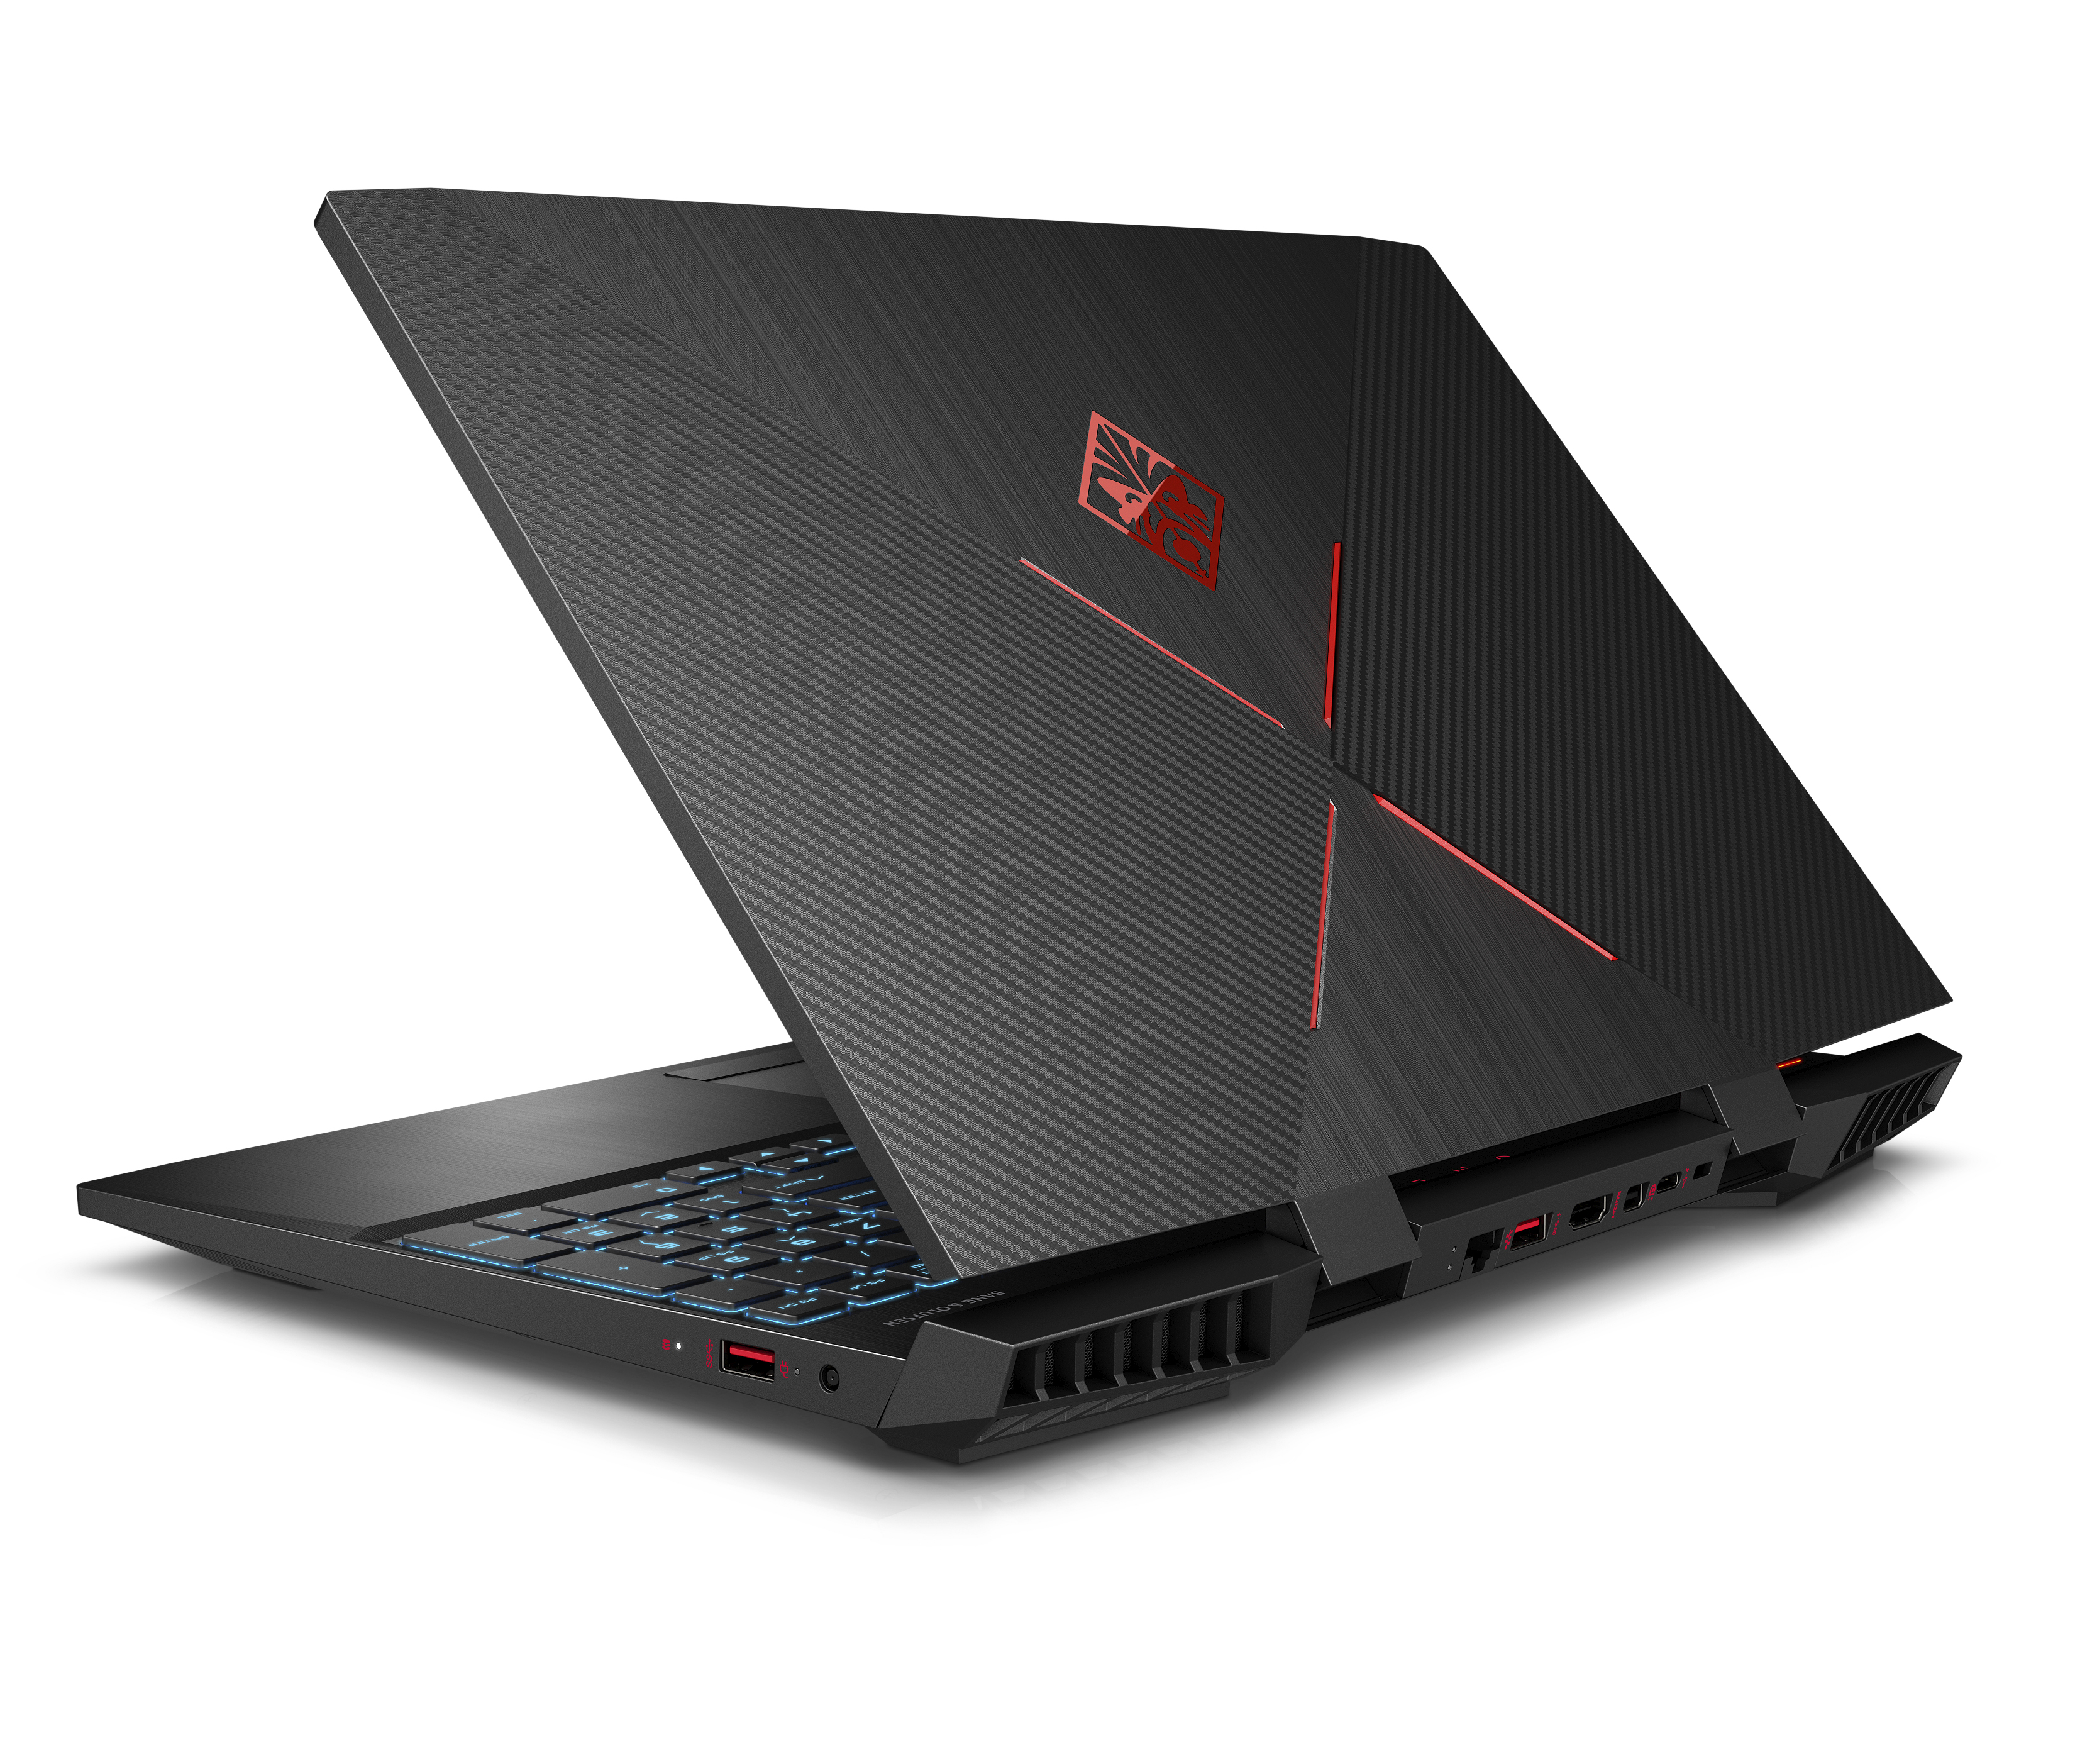 Omen by HP Gaming Laptop 15.6", Intel Core i7-9750H, NVIDIA GTX 1660Ti 6GB, 16GB RAM, 256GB SSD, Omen Headset and Mouse Included ($100 Value), 15-dc1088wm - image 4 of 9